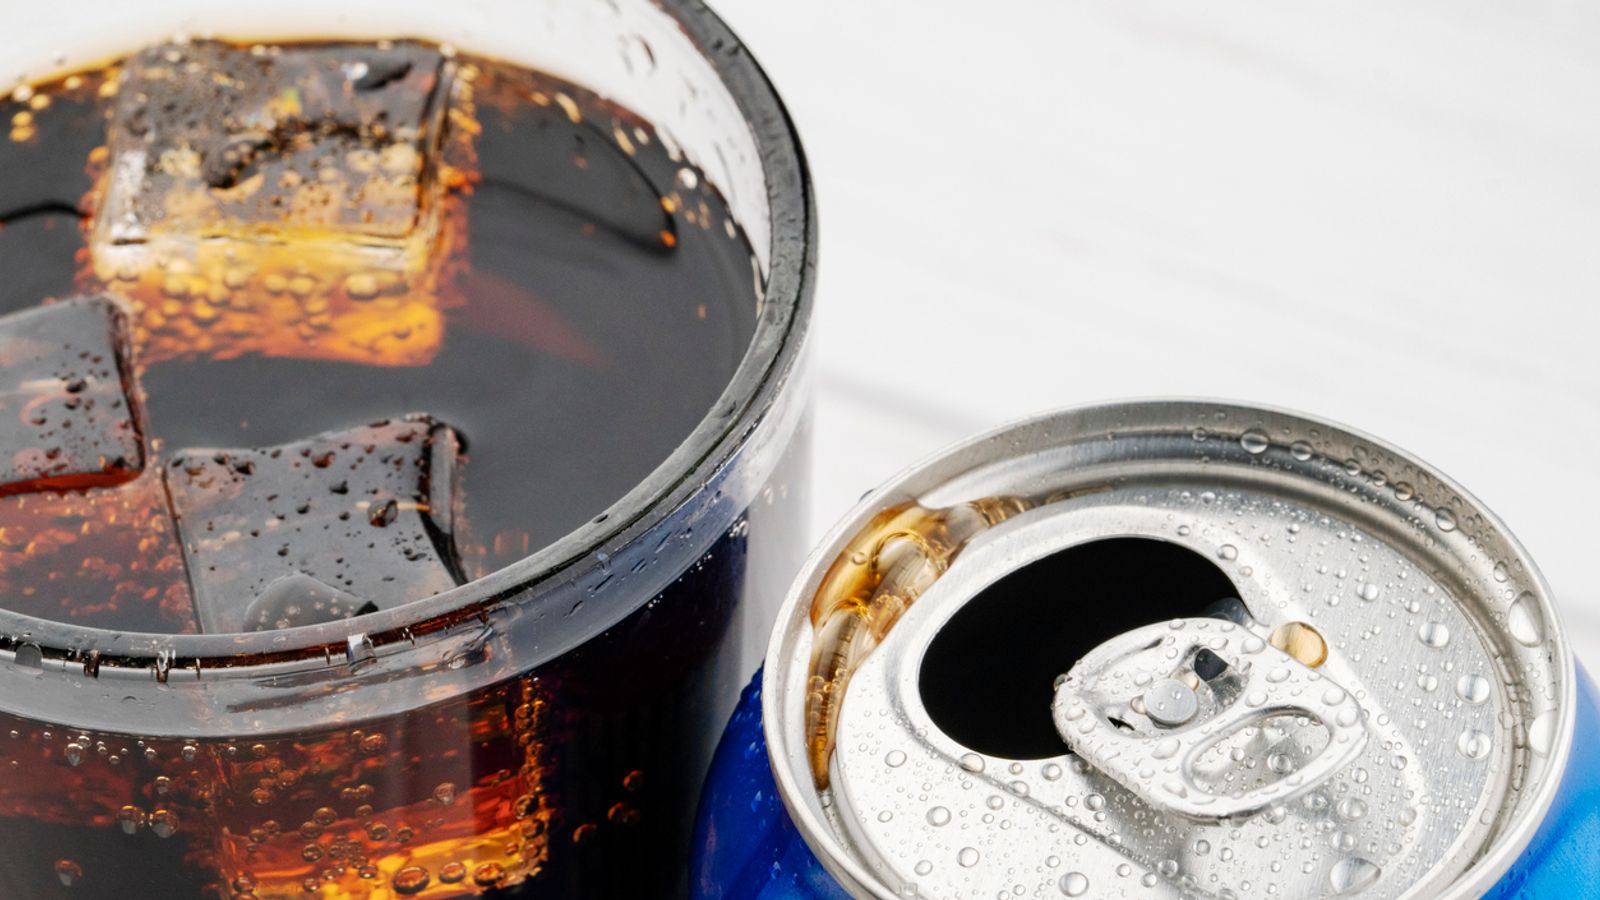 Aspartame labelled a 'potential cancer risk' - so how many cans of Diet Coke are safe to drink?